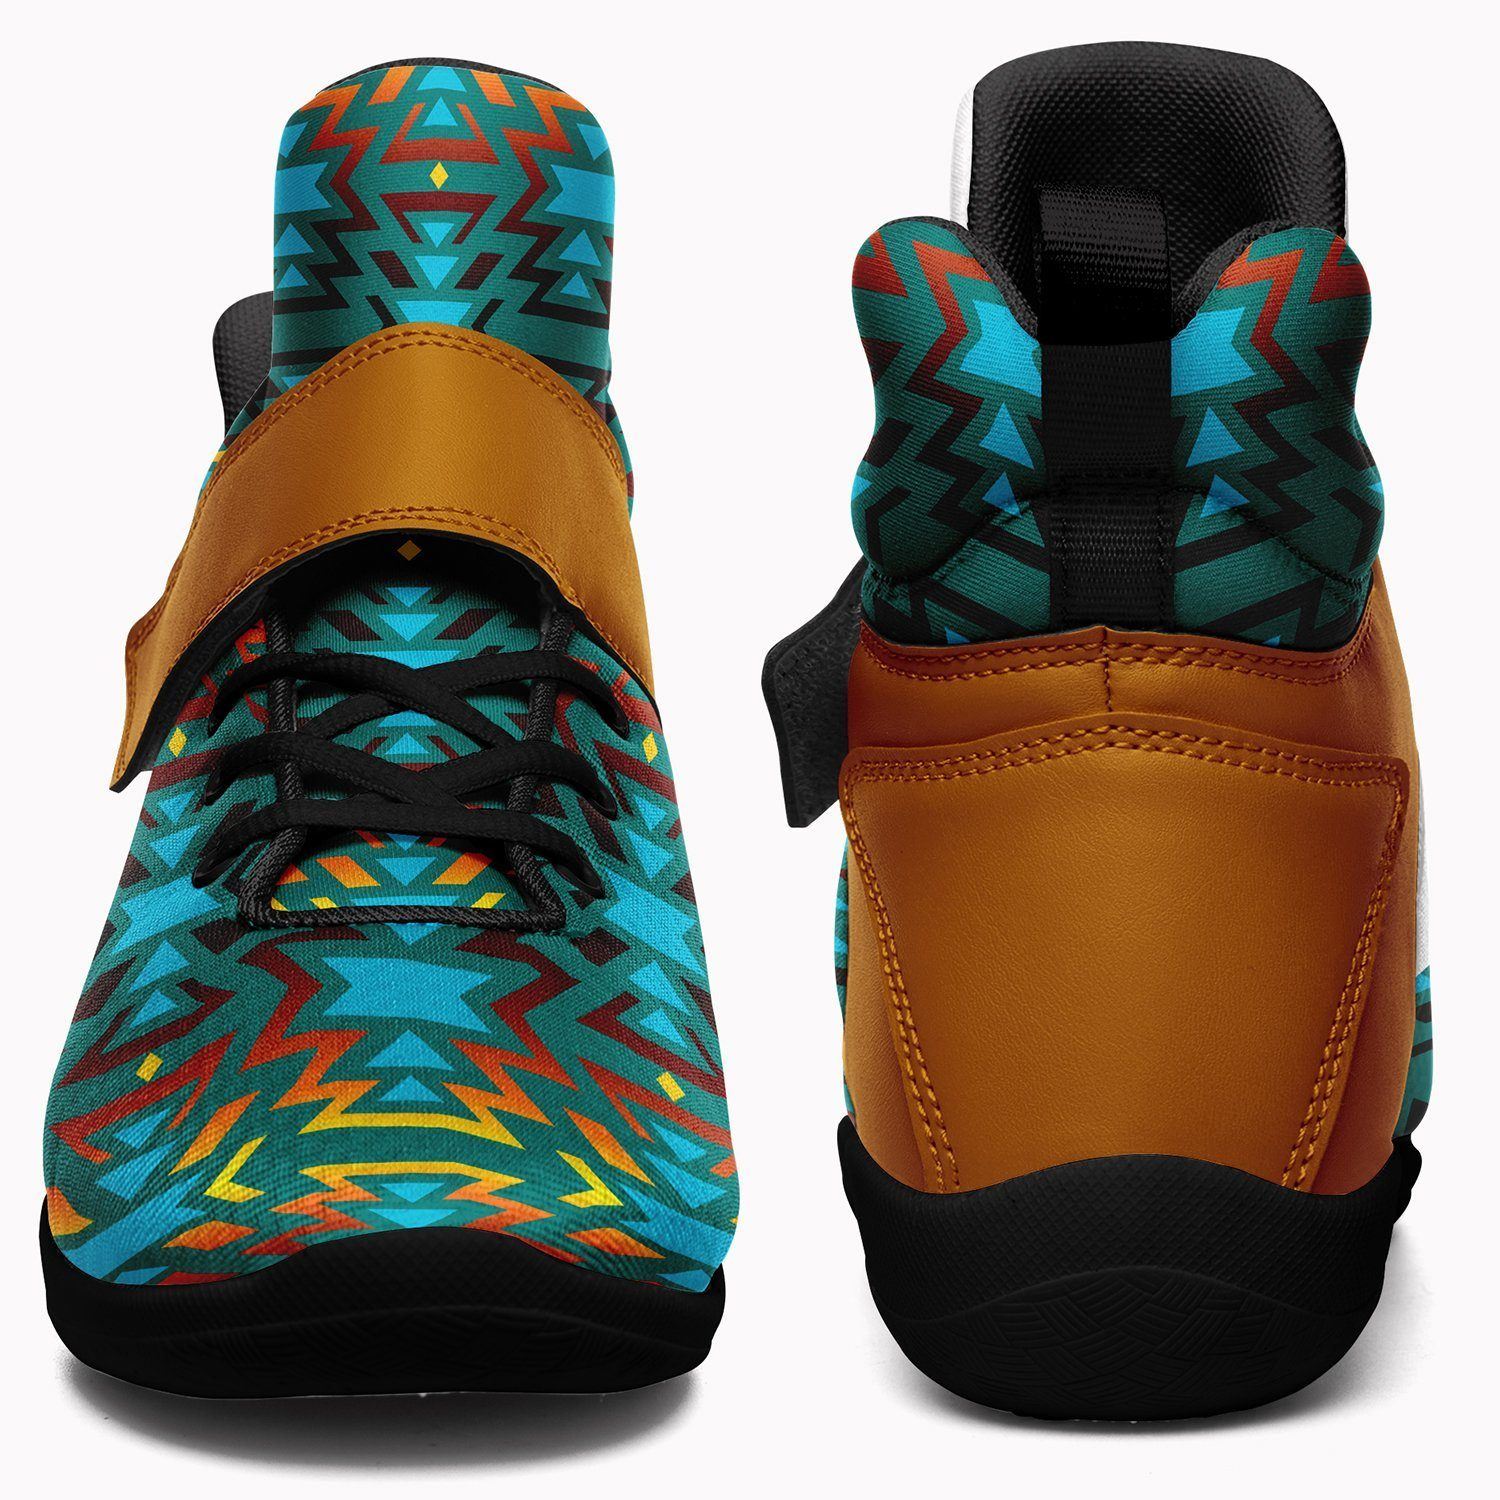 Fire Colors and Turquoise Teal Ipottaa Basketball / Sport High Top Shoes - Black Sole 49 Dzine 